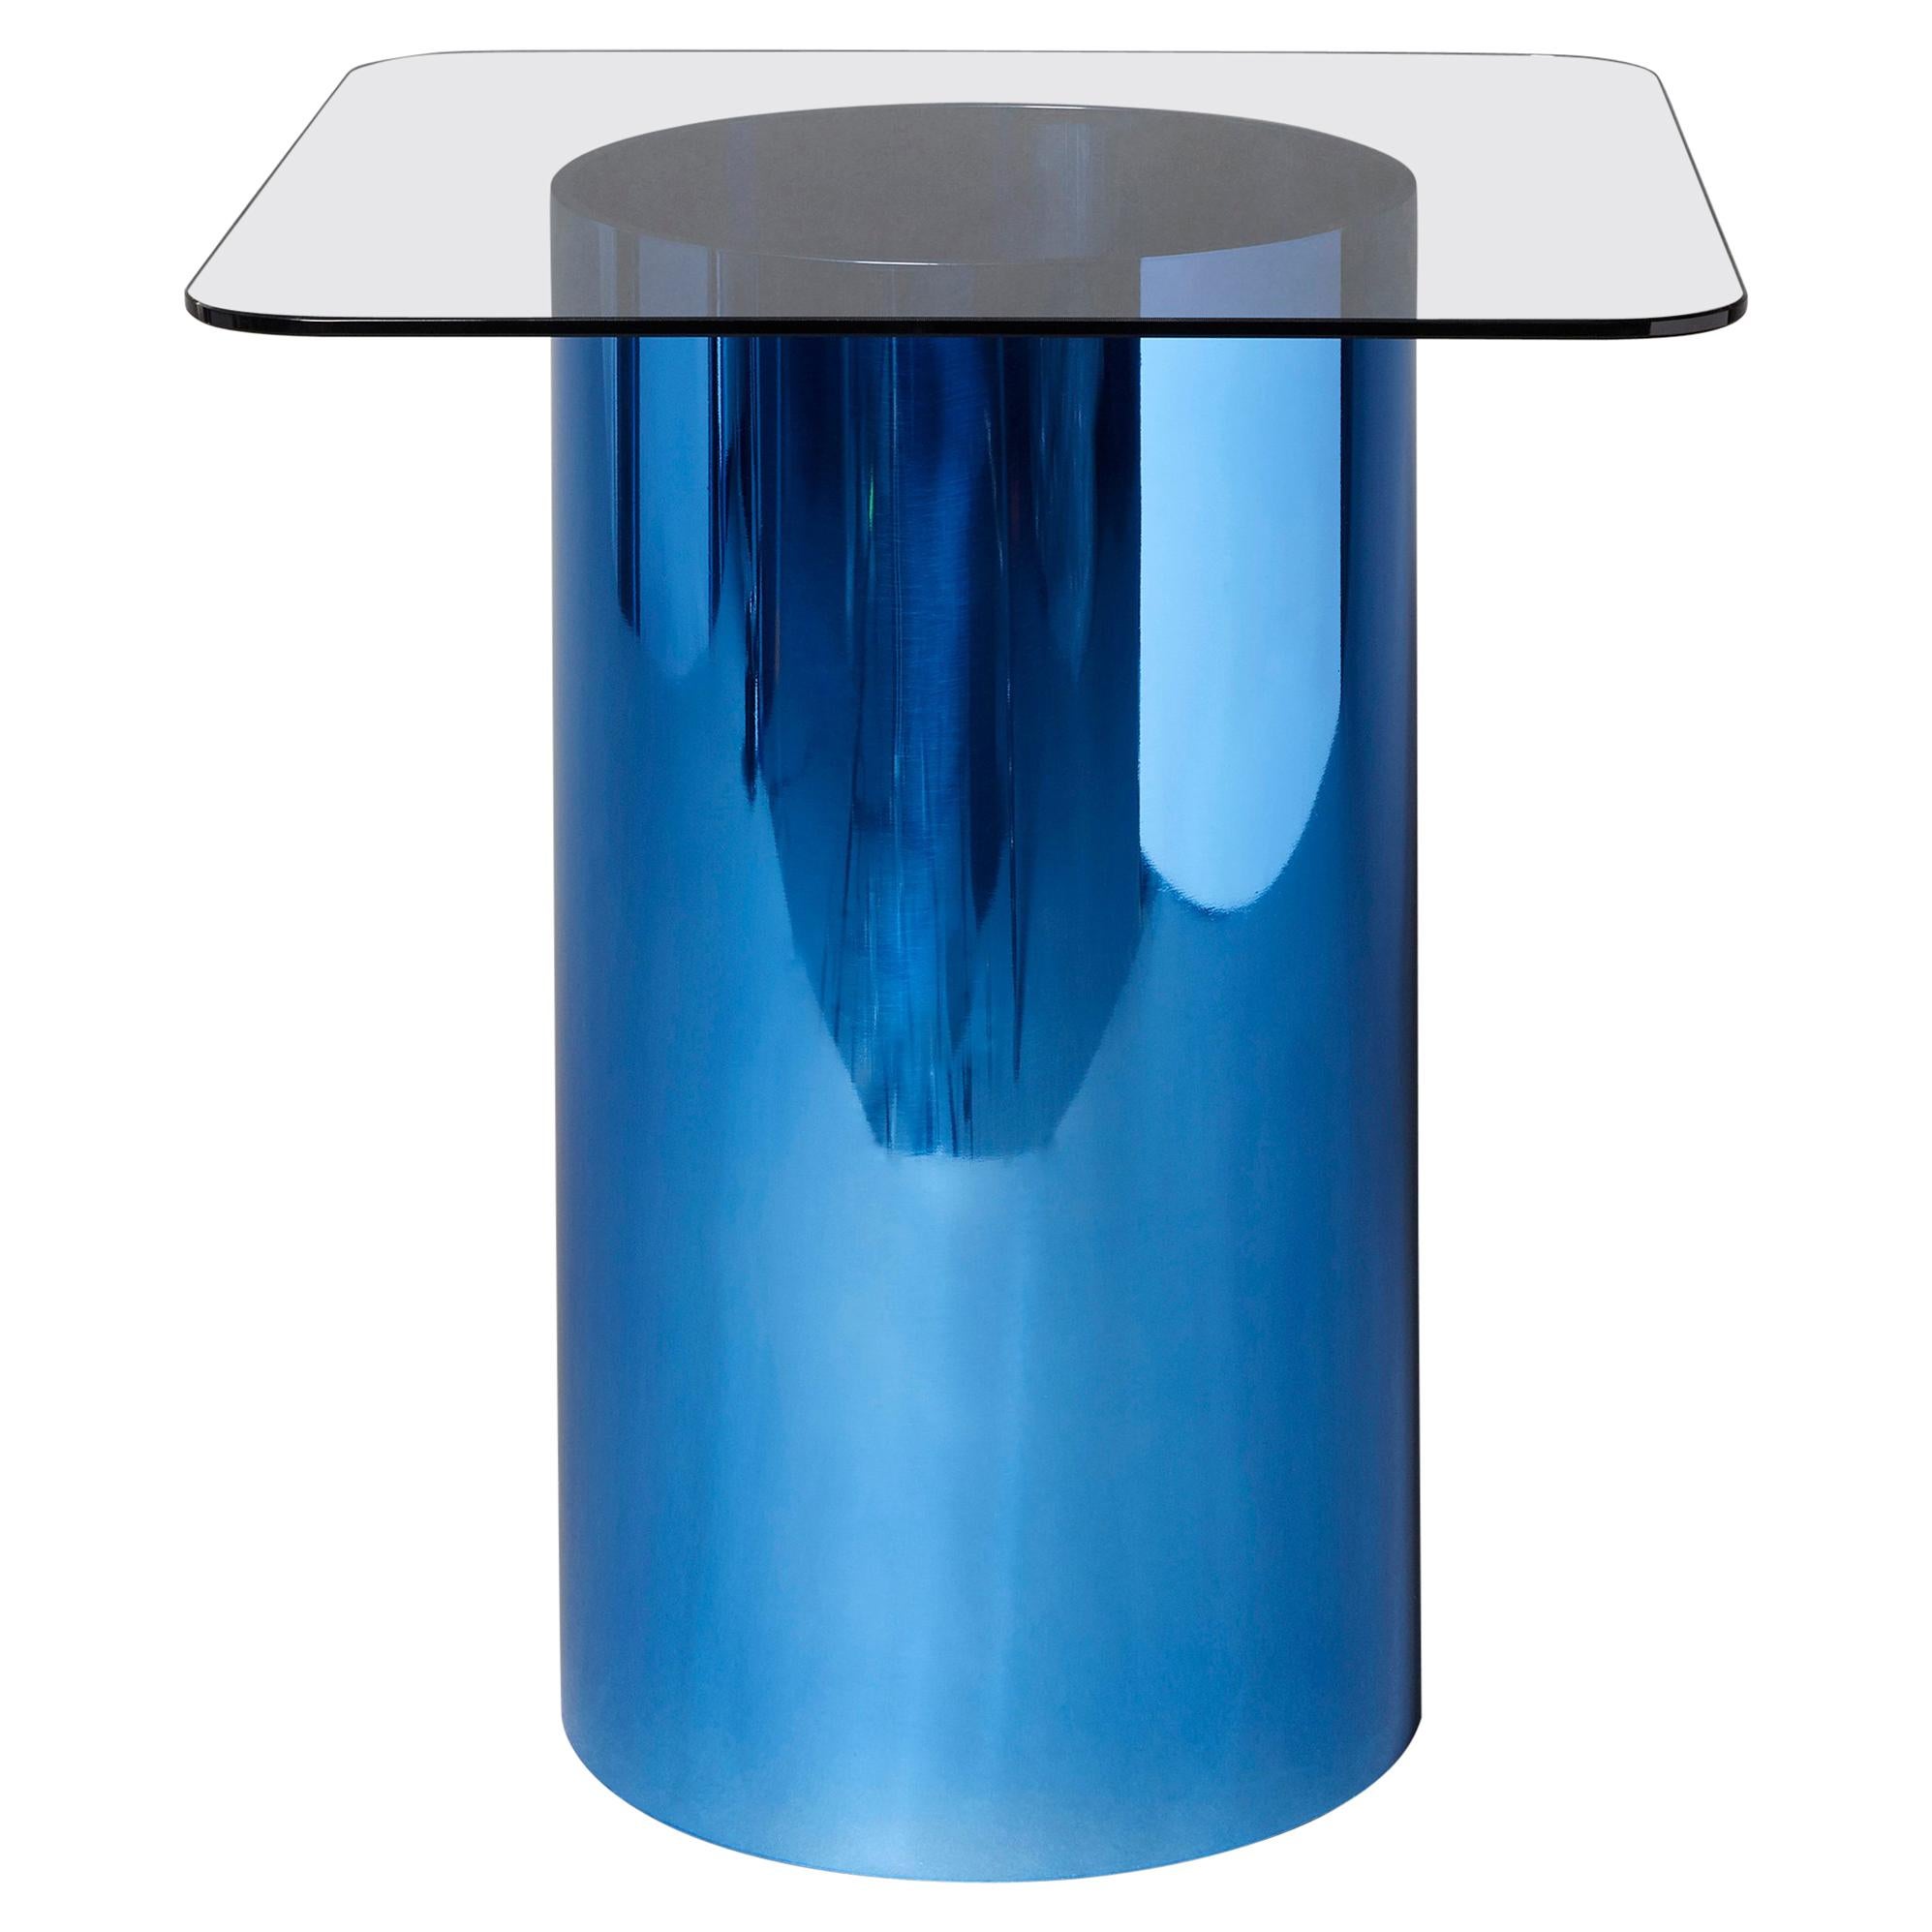 MMPM Minimalist Side Table - Tinted Glass with Polished Tubular Aluminium  For Sale